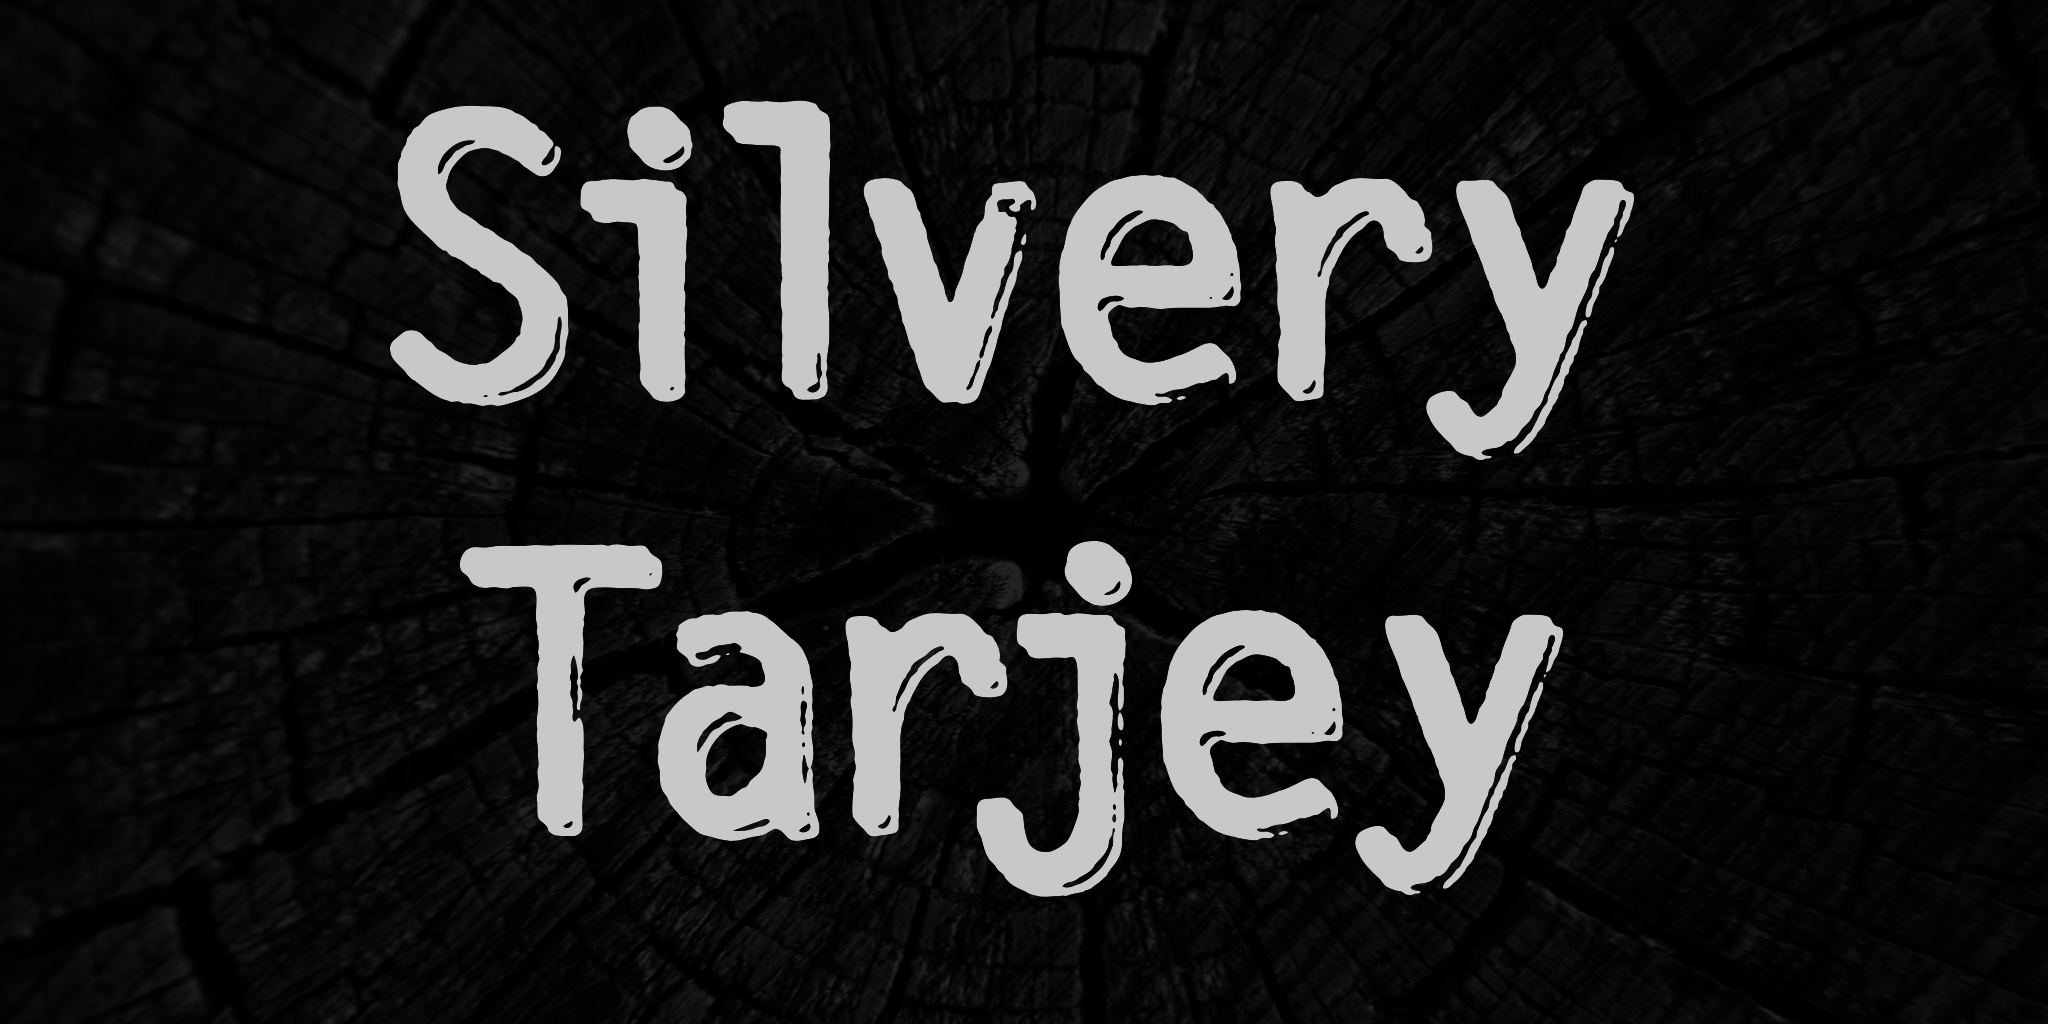 Silvery Tarjey